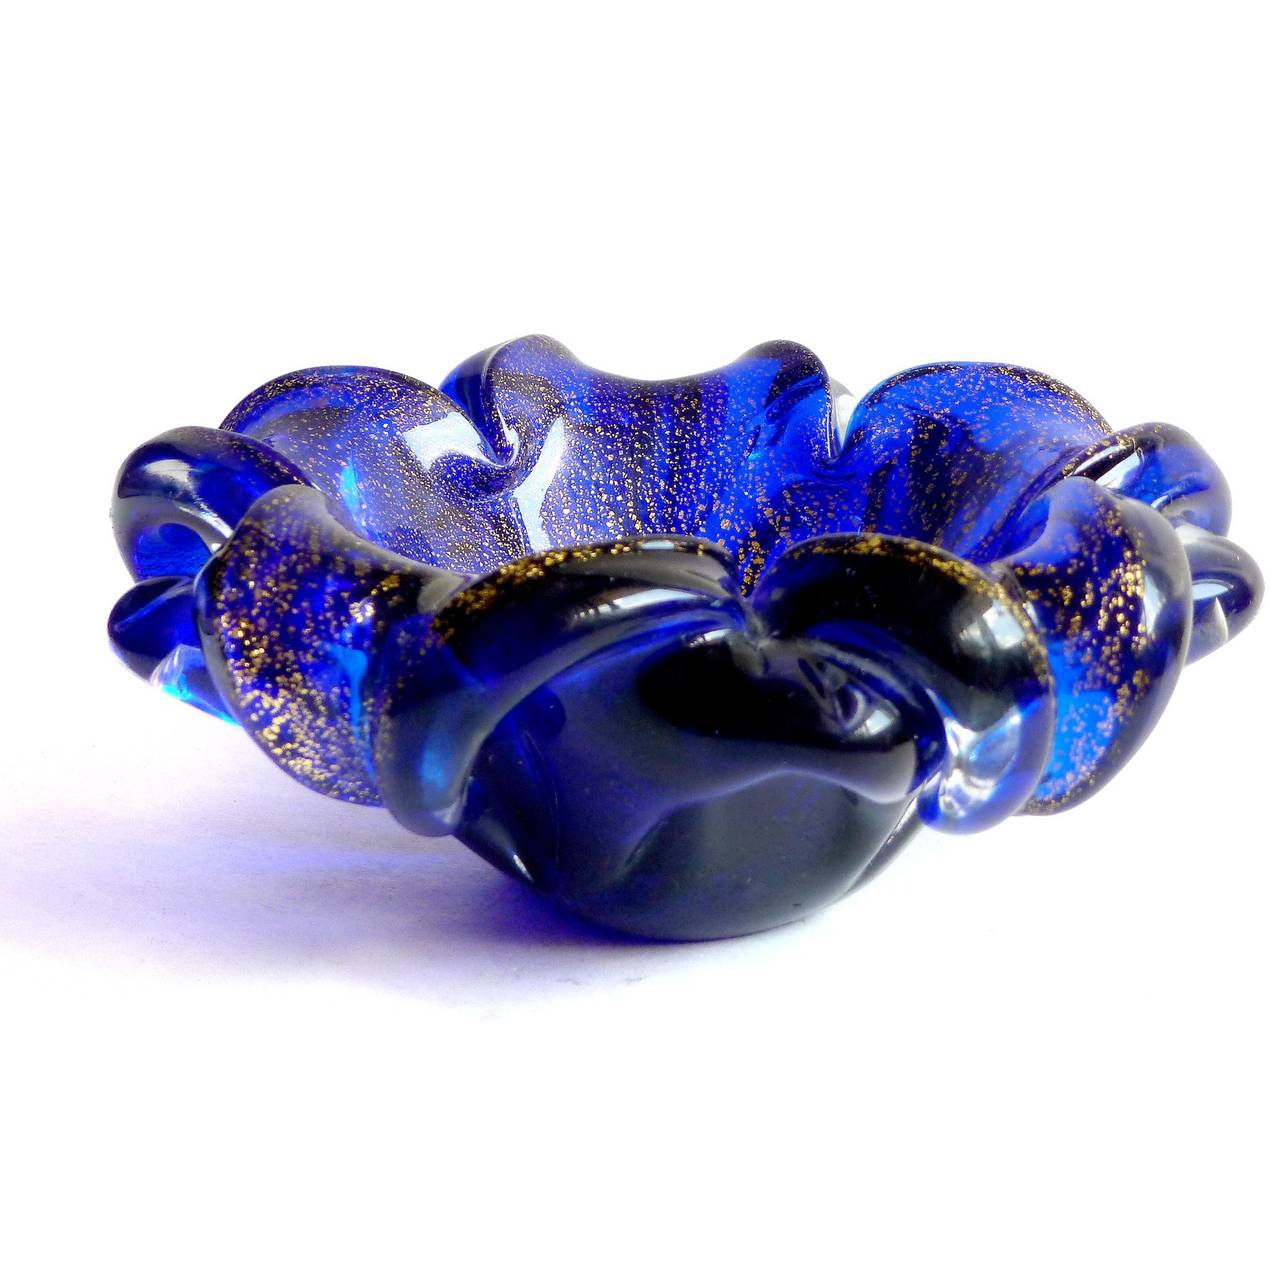 FREE Shipping Worldwide! See details below description.

Beautiful Murano Hand Blown Deep Cobalt Blue and Gold Flecks Art Glass Flower Shaped. Created in the manner of Archimede Seguso. The piece has a double petal design with clear pulled petals